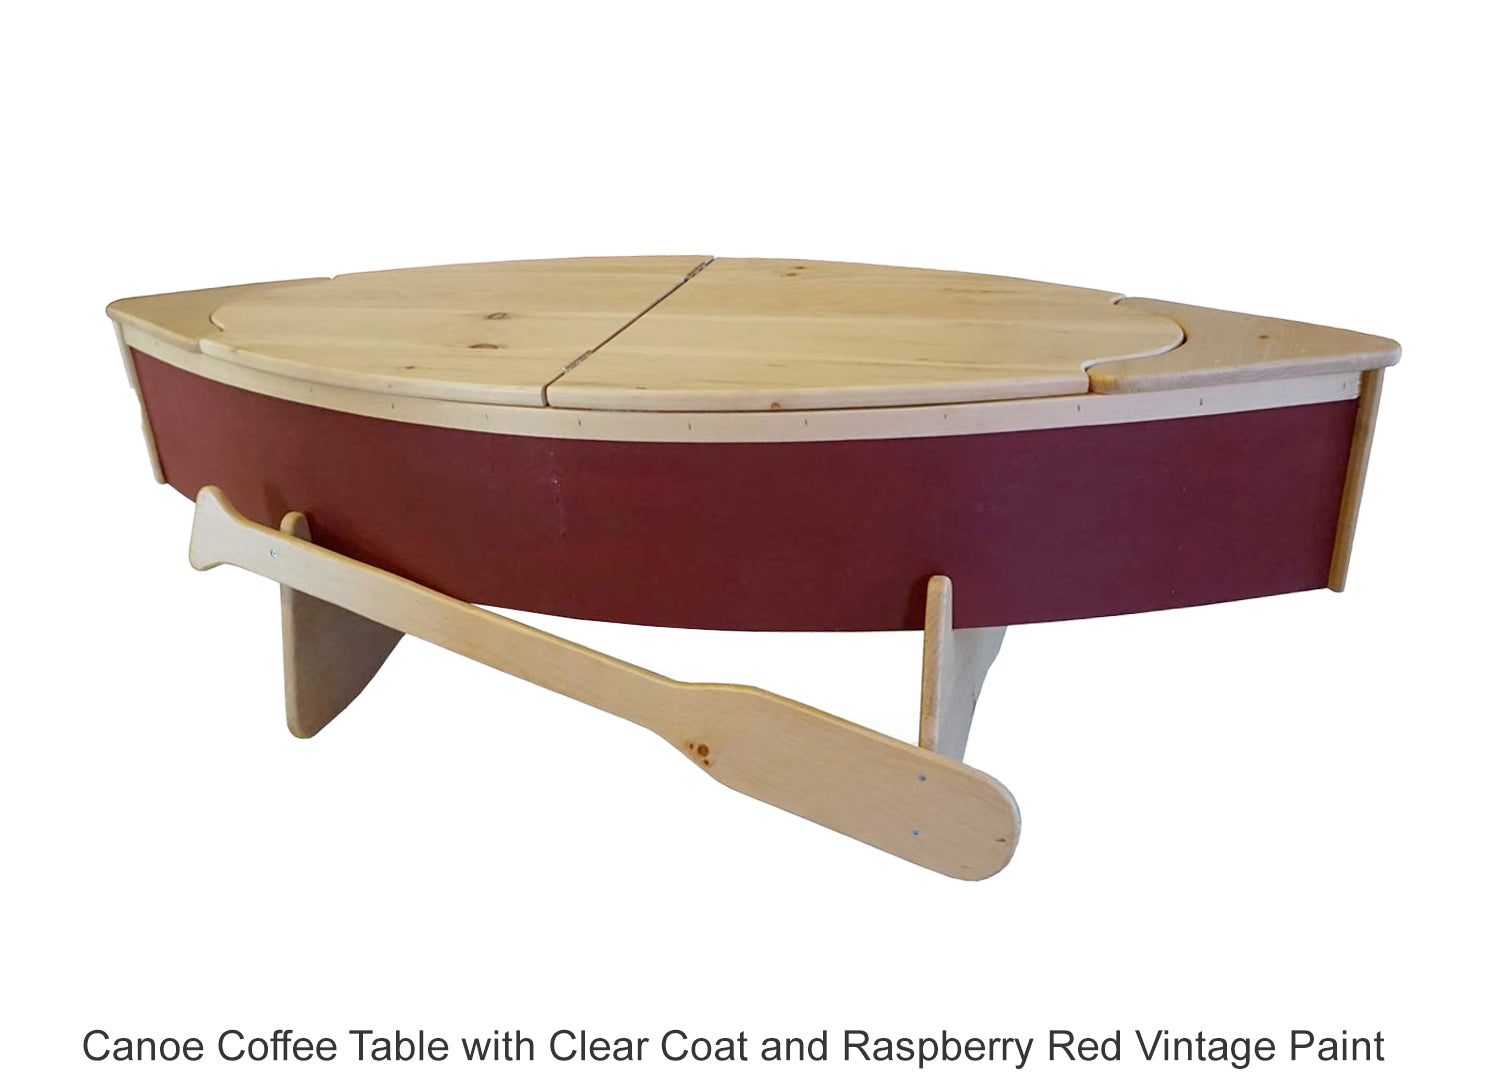 Canoe Coffee Table with Clear Coat and Raspberry Red Vintage Paint